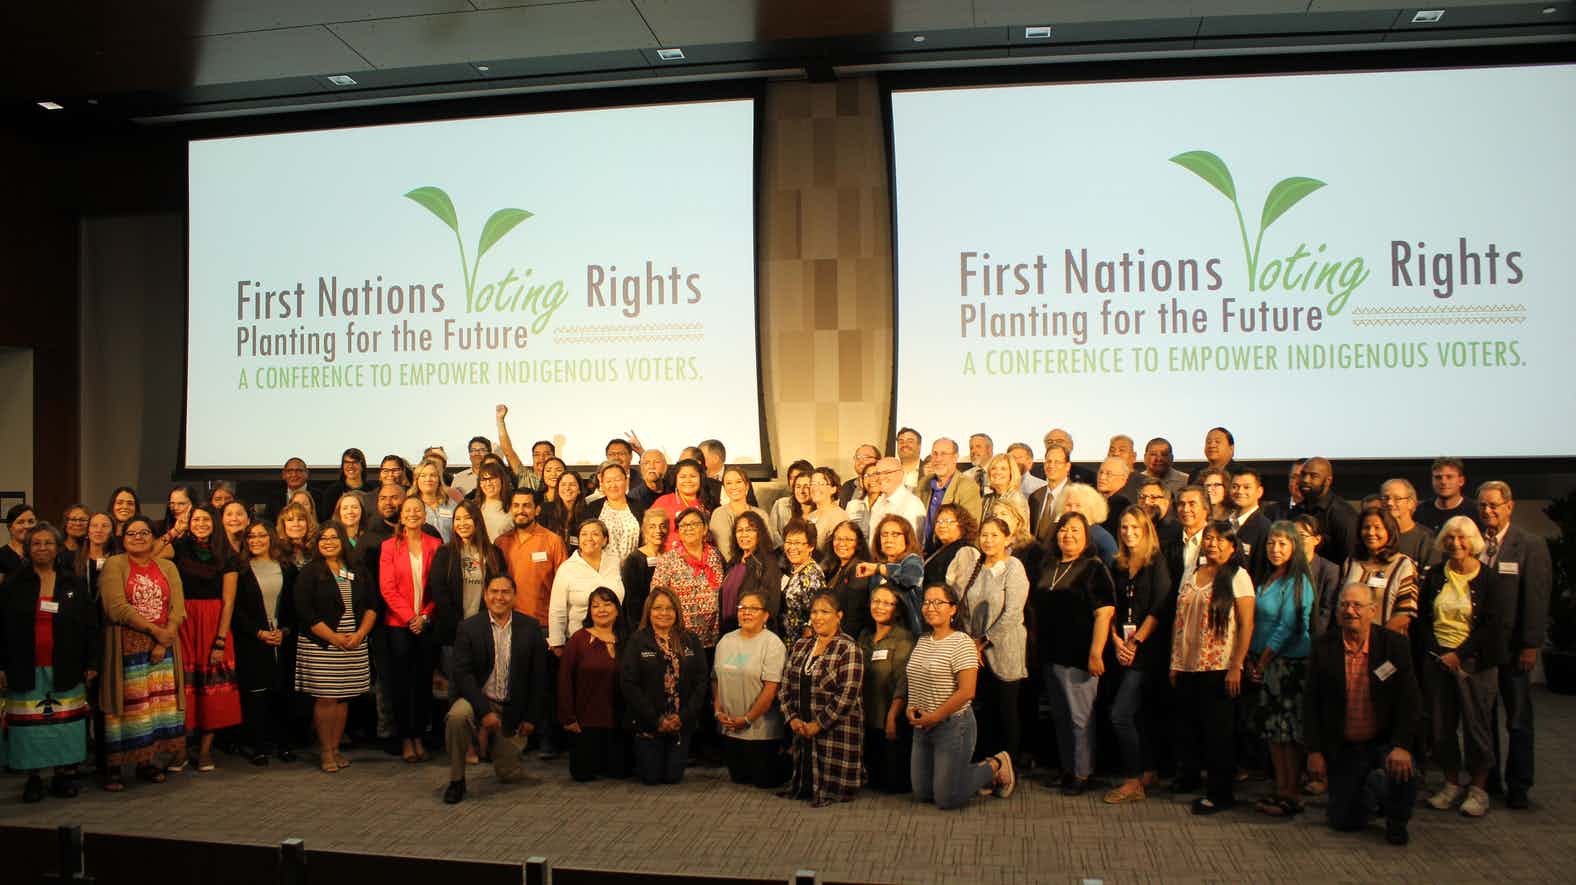 https___images.saymedia-content.com_.image_MTY3NTg3MjM4MzA0MDMyMTM1_first-nations-voting-rights-conference-2019